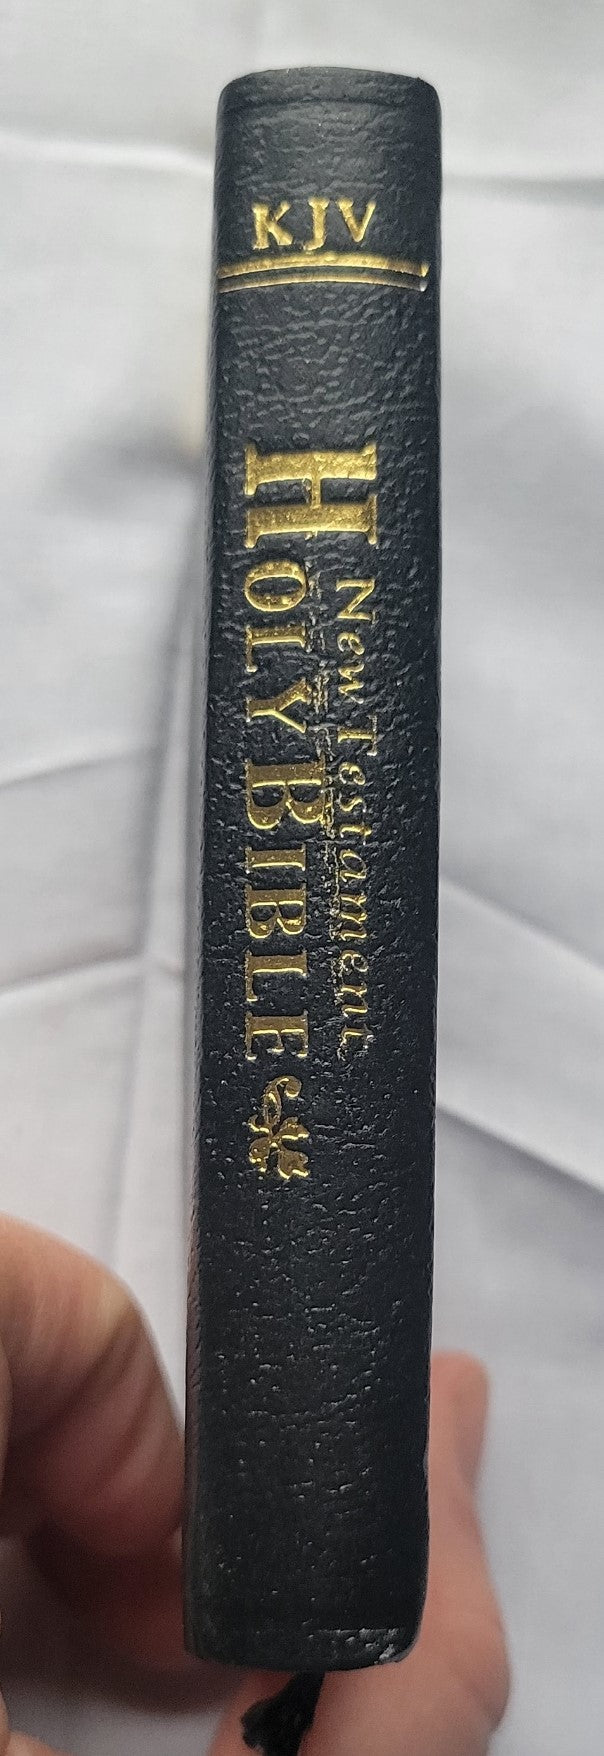 Used book for sale, Pocket size, red letter, King James Version New Testament. View of spine.